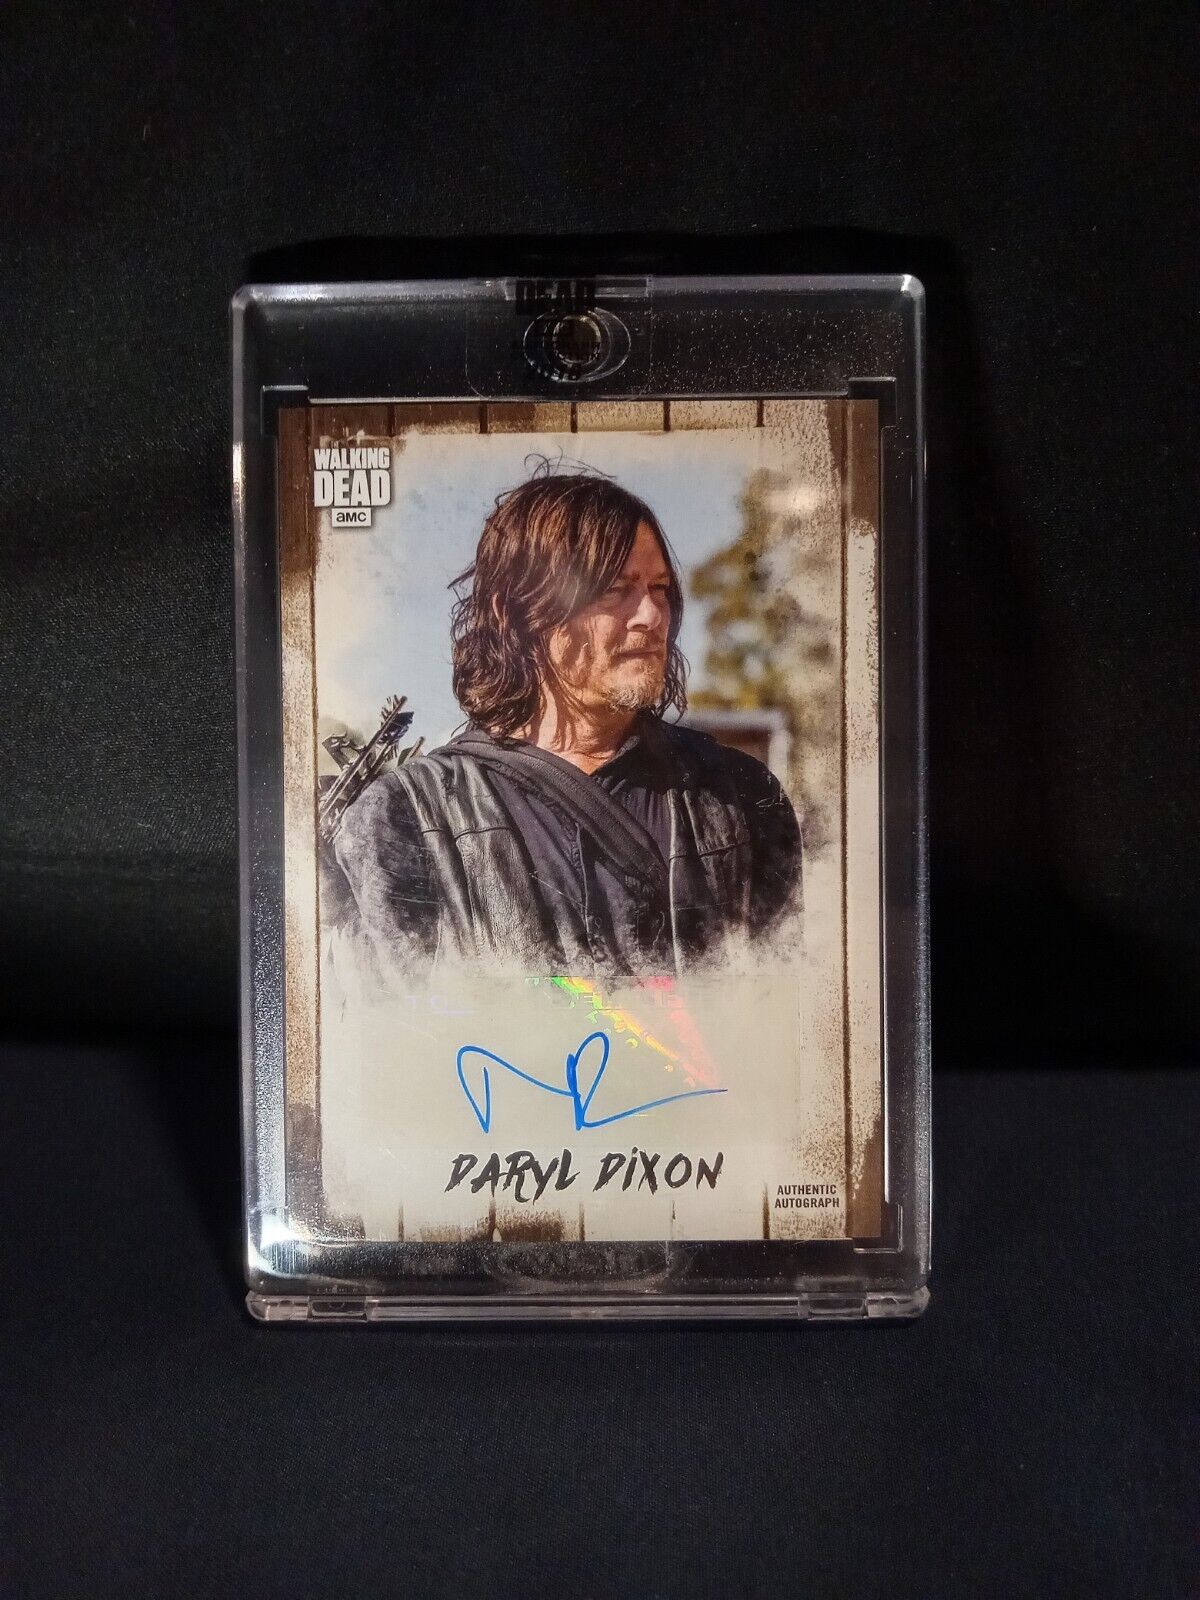 2018 TOPPS THE WALKING DEAD COLLECTION NORMAN REEDUS DARYL DIXON AUTOGRAPH /90